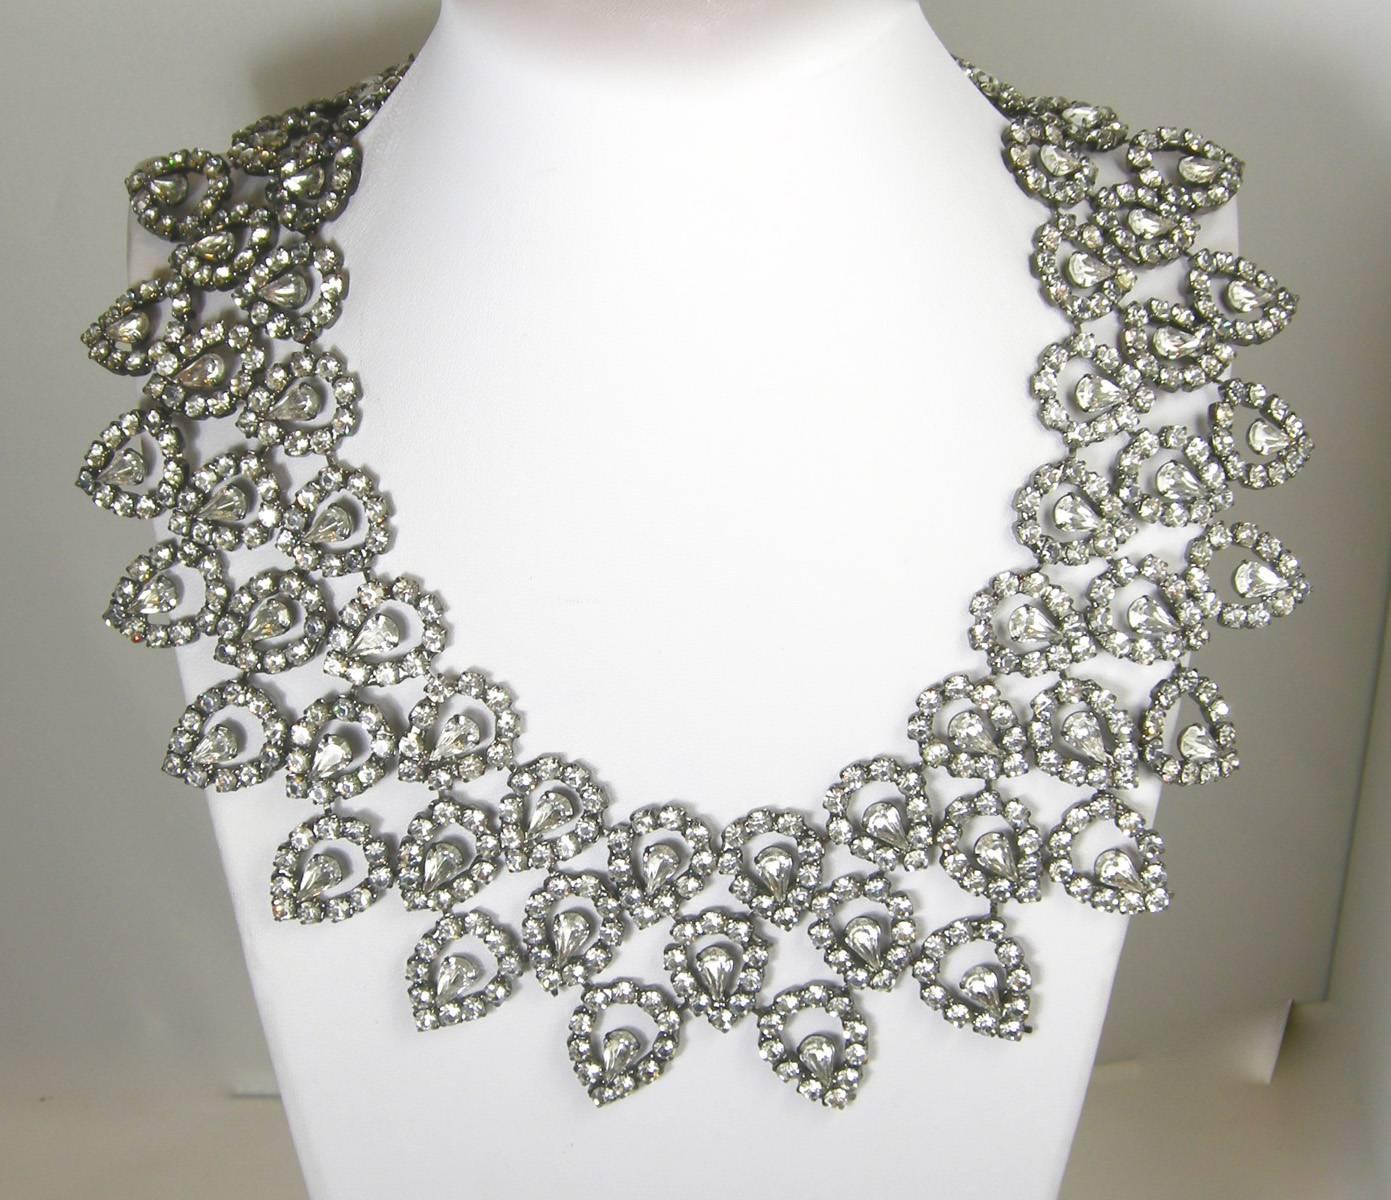 This dramatic 1980s collar Kenneth Jay Lane necklace is very dramatic.  Each intricate rhinestone row of teardrops is connected to each other and has a center pear shaped rhinestone inside.  It is 16” but can be extended to be worn 20”.  It is